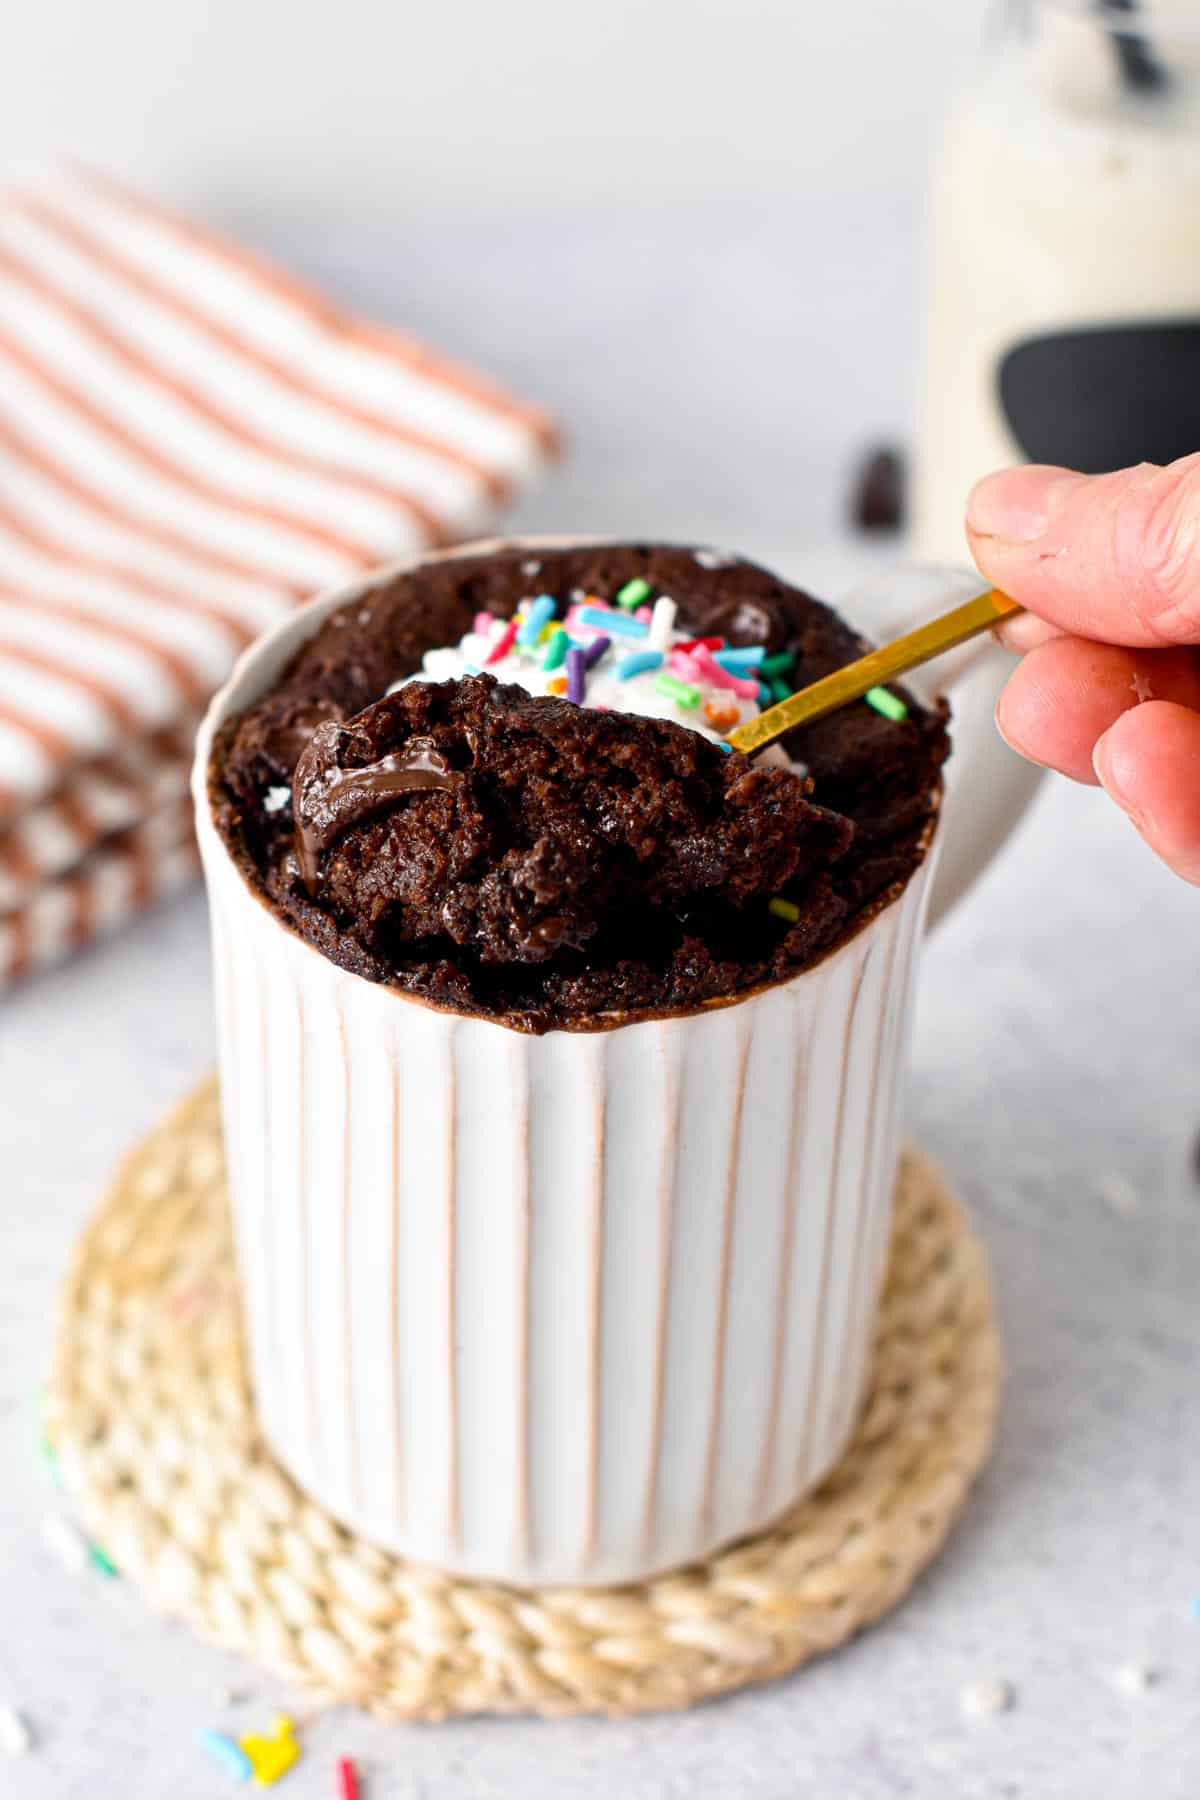 This Vegan Gluten-free Mug Cake recipe is a delicious single serve chocolate cake baked in your microwave in 90 seconds to fix your sweet tooth. Plus, this is a vegan oil-free mug cake too, perfect if you are looking for oil-free baking recipe.